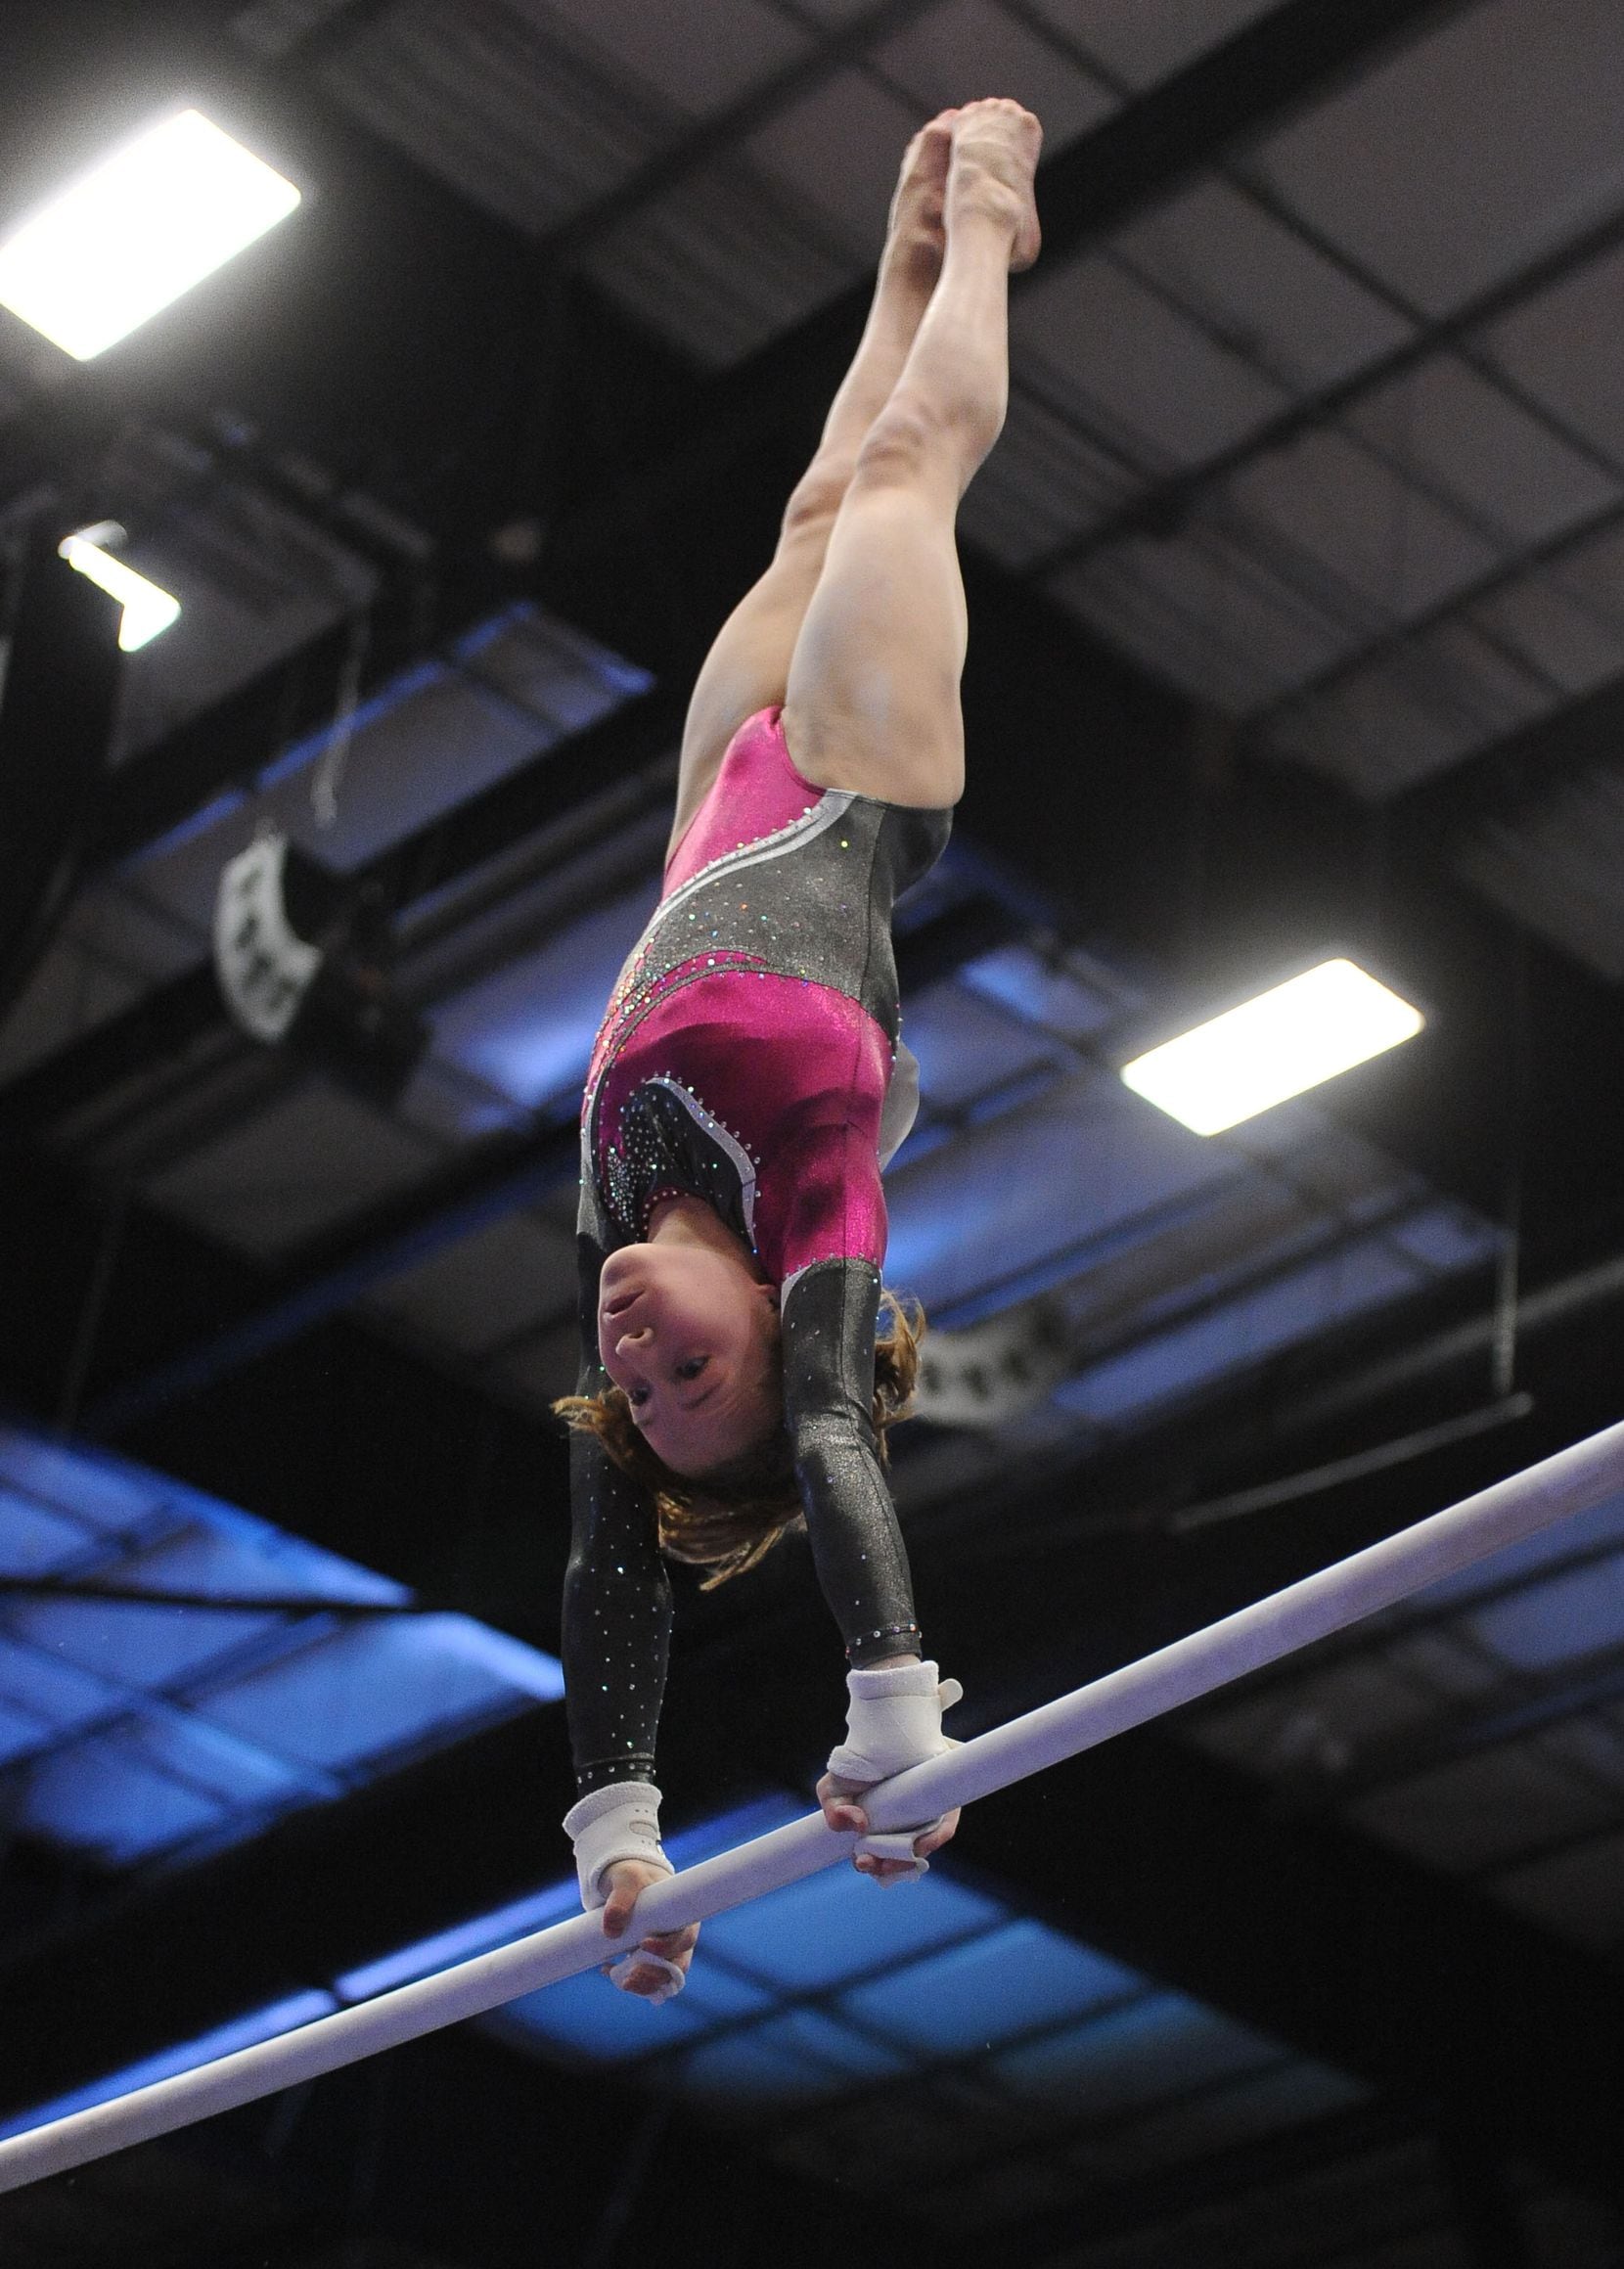 WOGA gymnast Madison Kocian competes on the bars during the competition. Gymnasts from Texas...